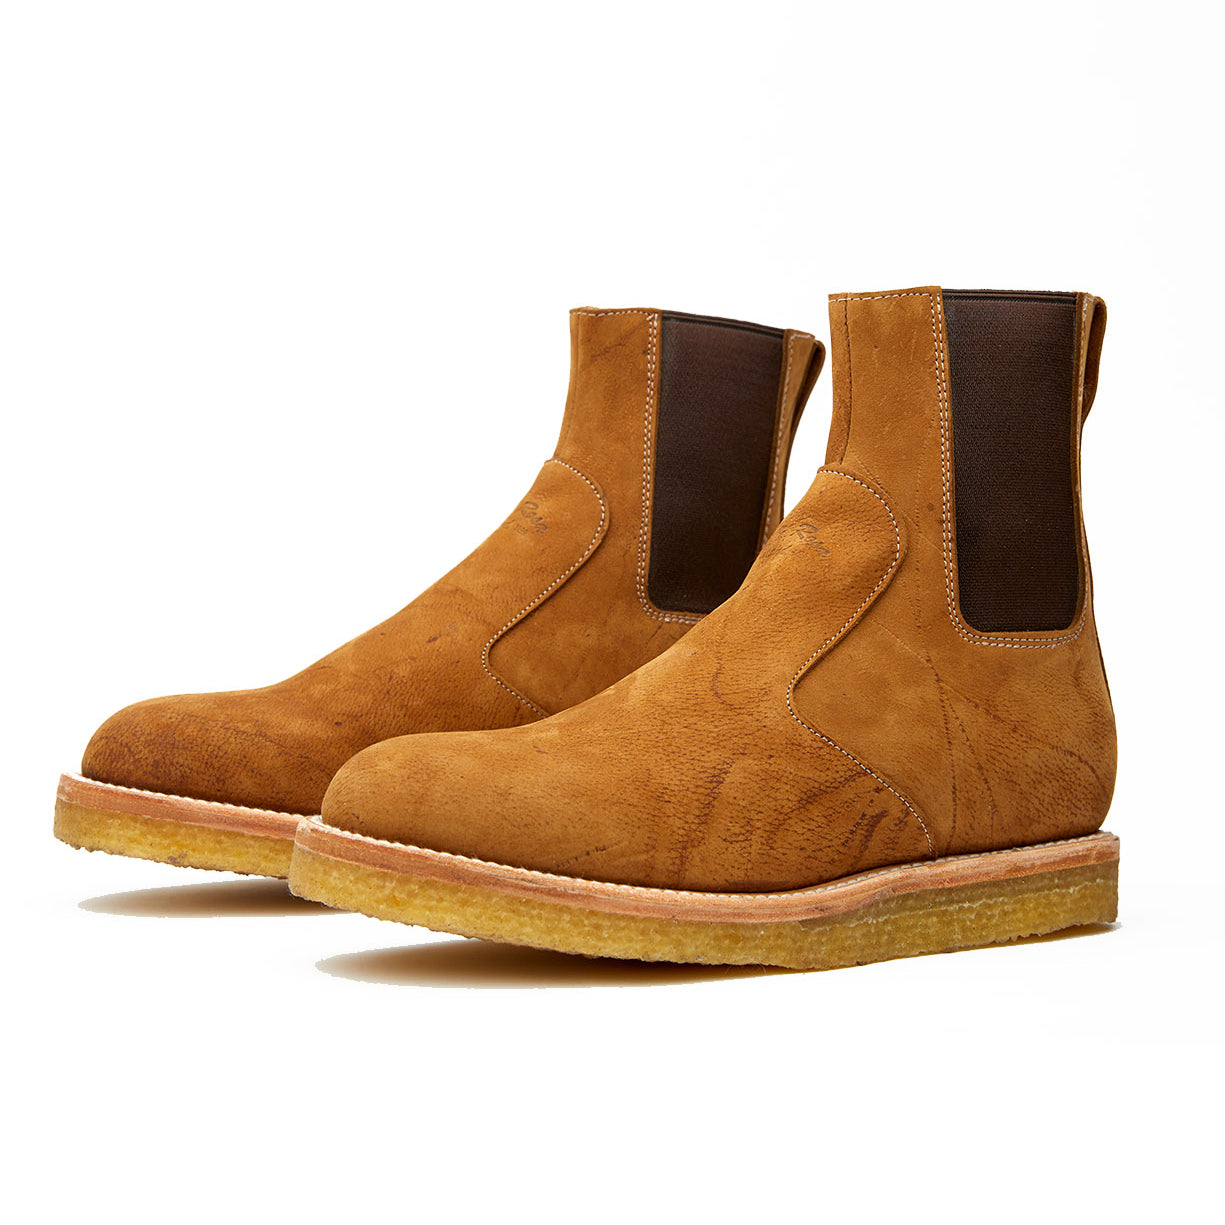 A pair of Santa Rosa Brand Stamford boots in tan suede featuring a natural crepe outsole and crafted with veg tan leather, all set against a white background.